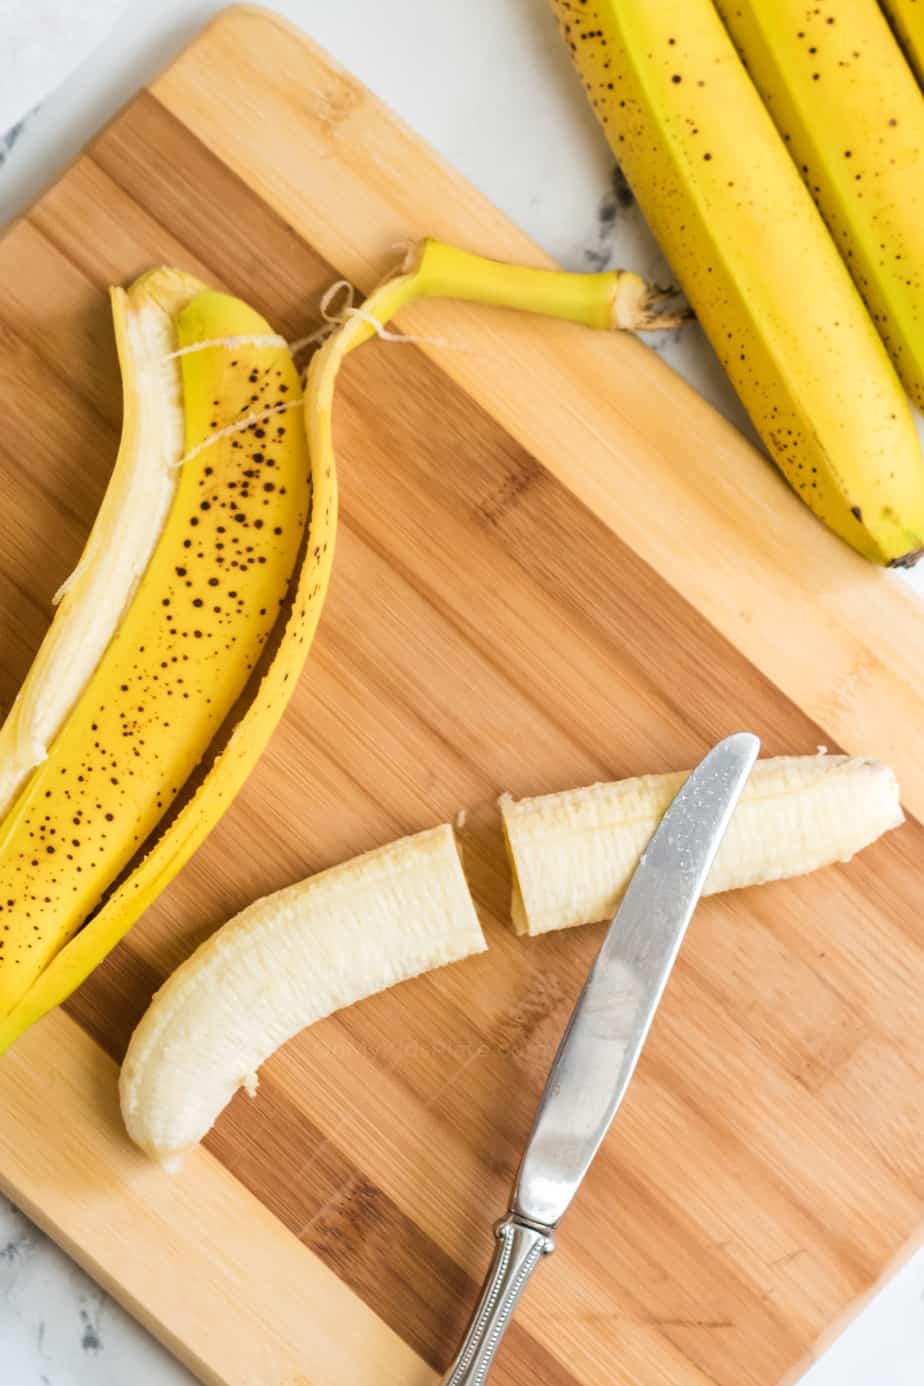 Banana being sliced in half with a knife on a cutting board next to the peel and more bananas